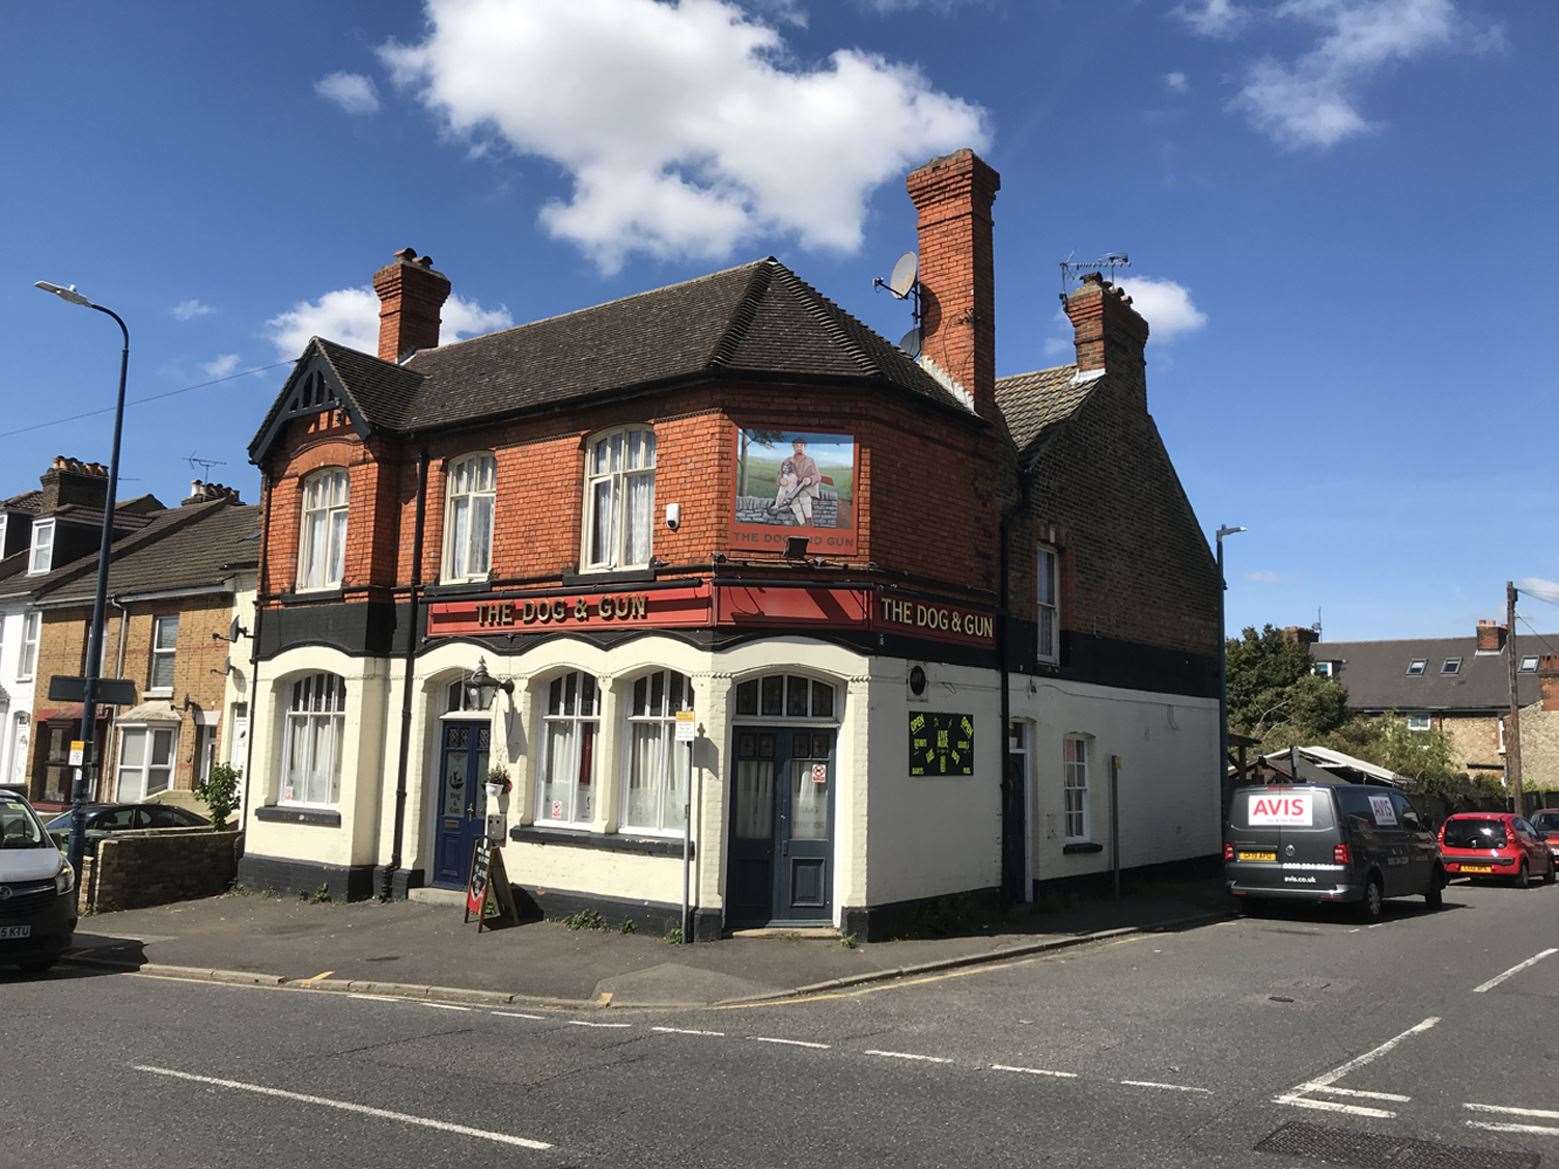 The Dog and Gun pub in Maidstone has been sold and is in the process of being converted into flats